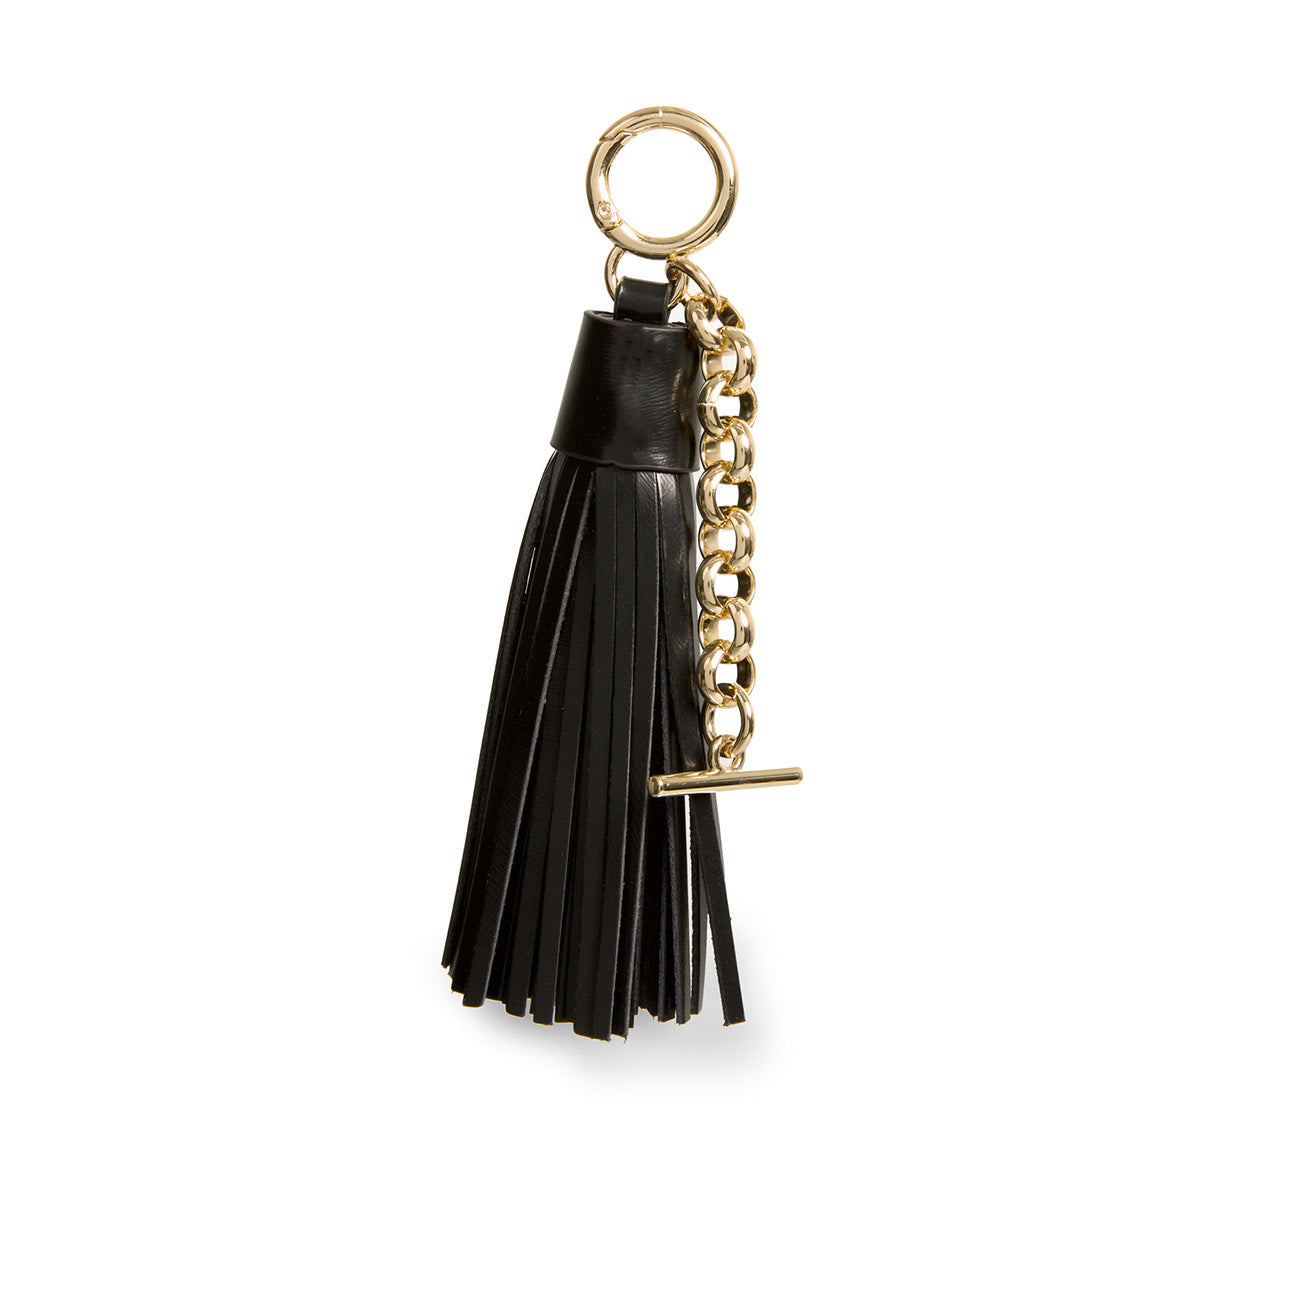 SAMPLE - The Harlow Lux Keychain Black Light Gold